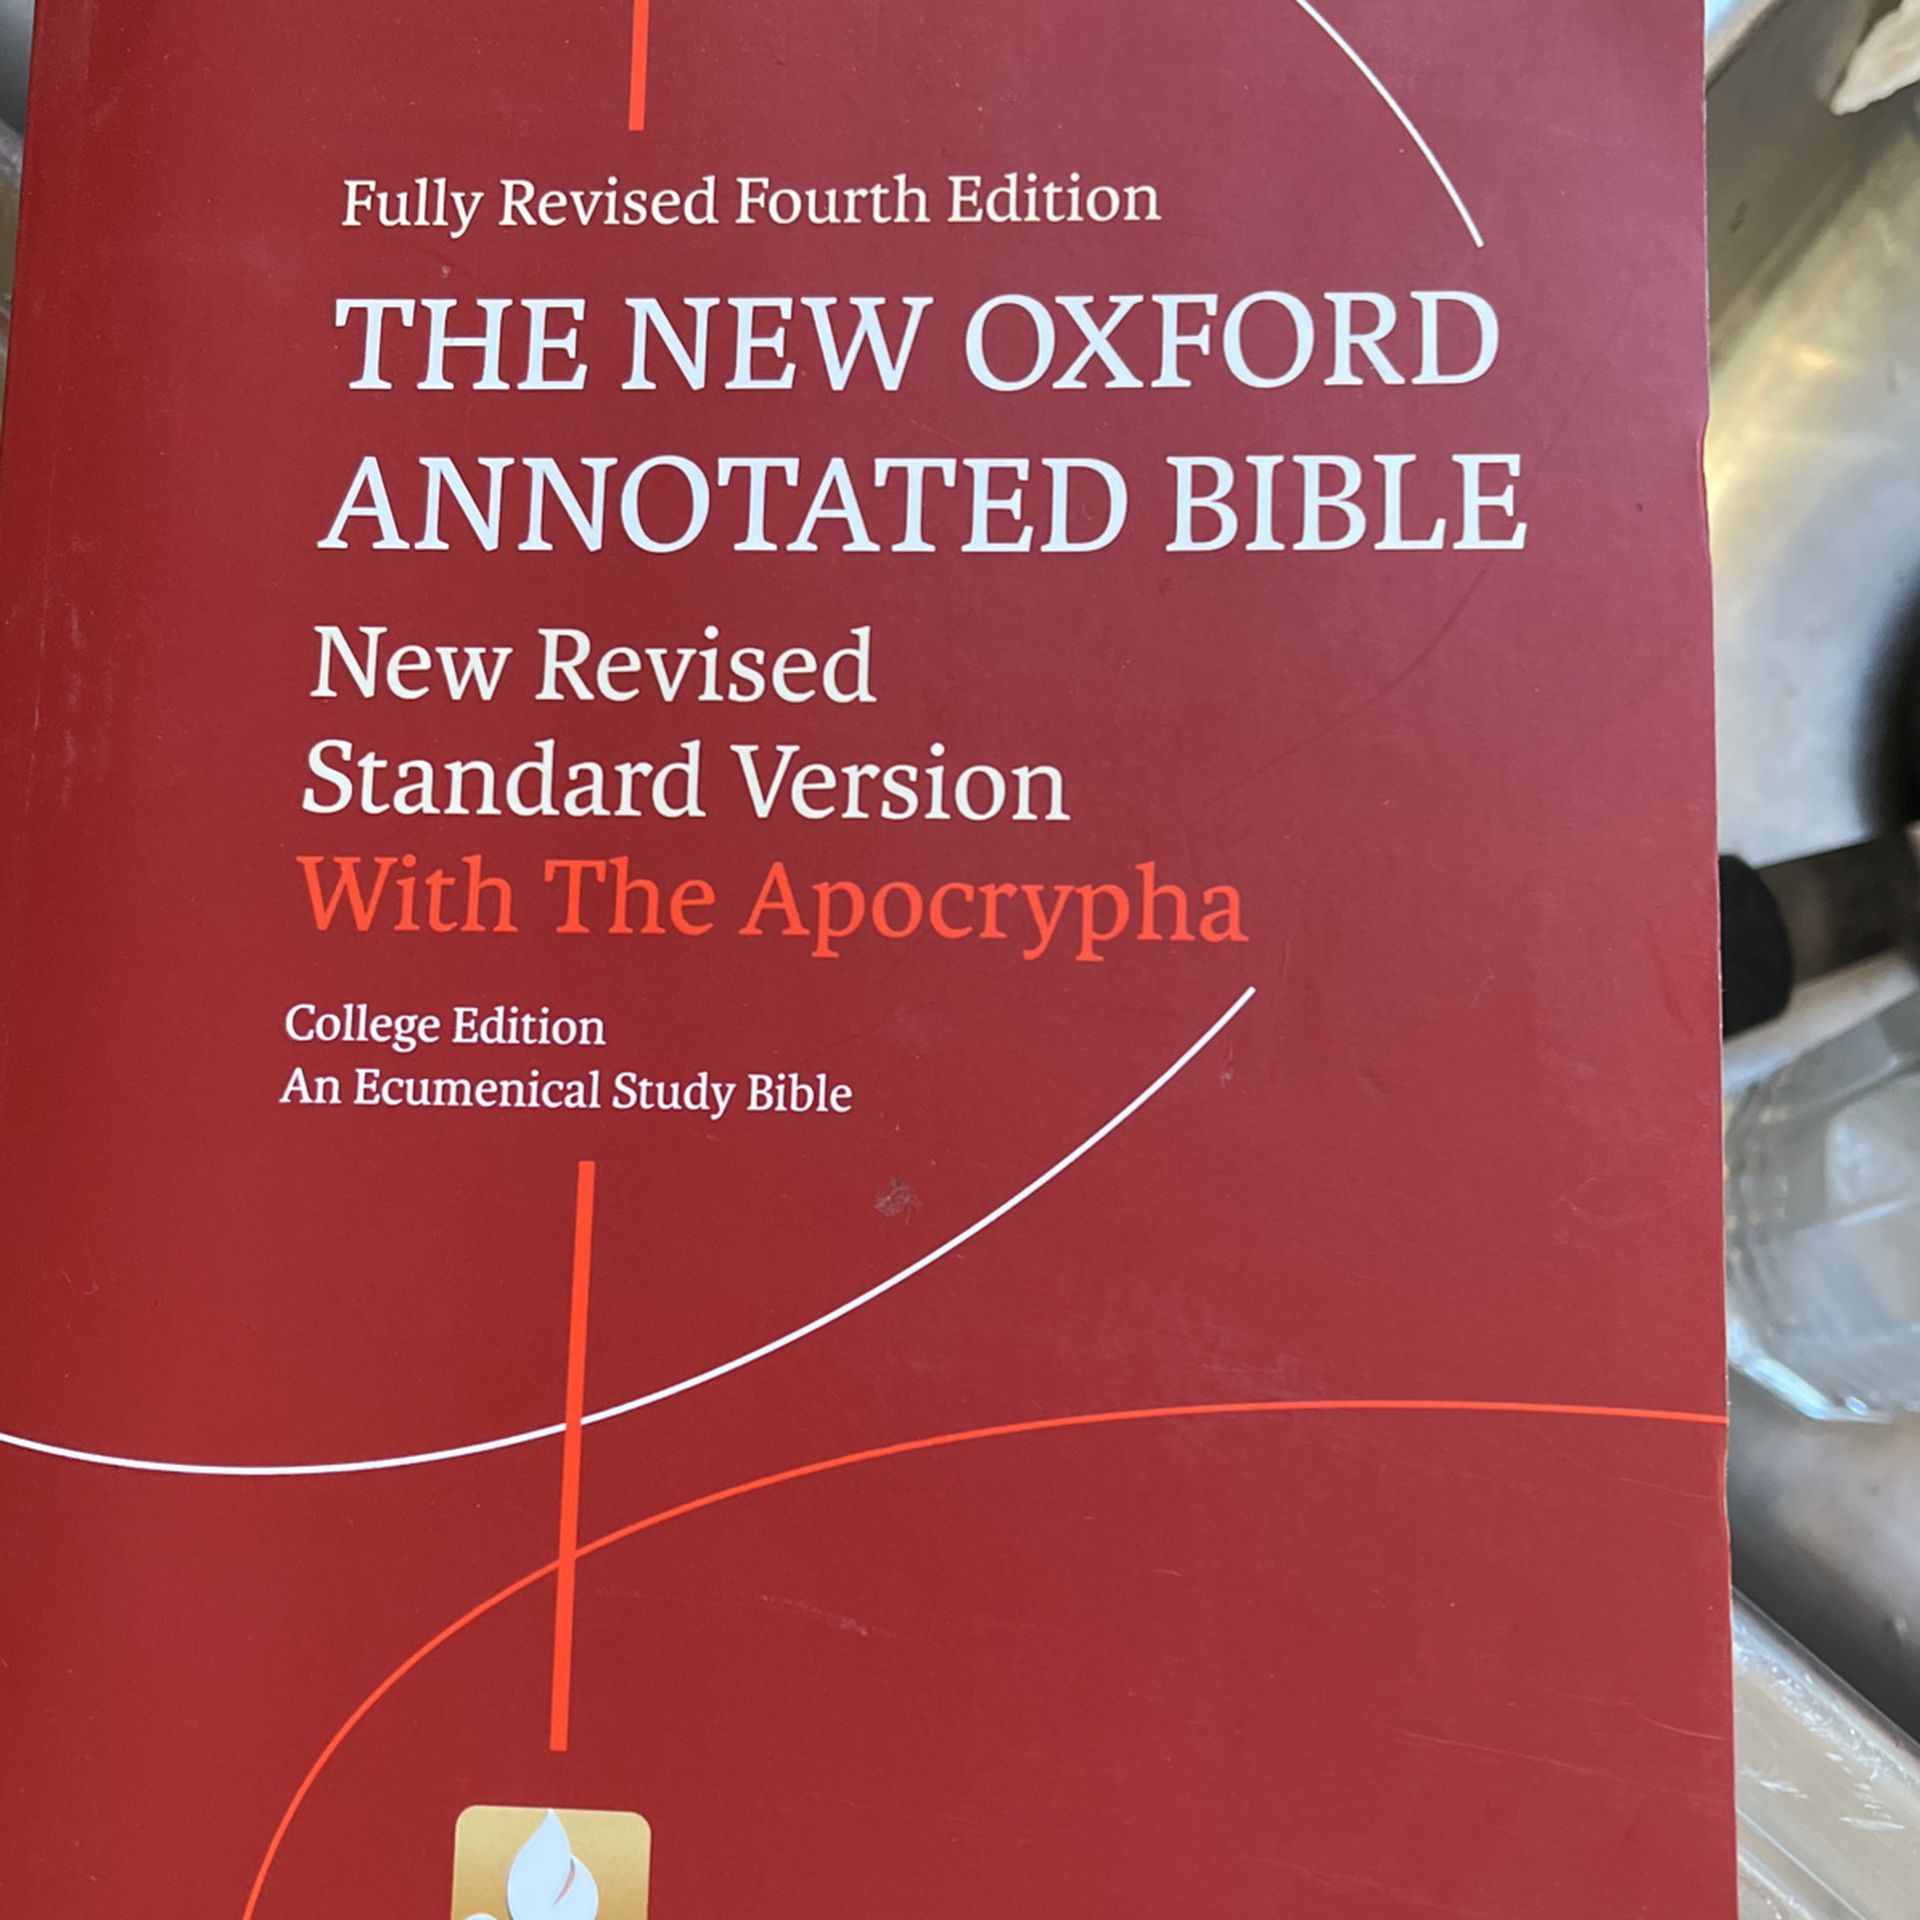 Oxford Annotated Bible